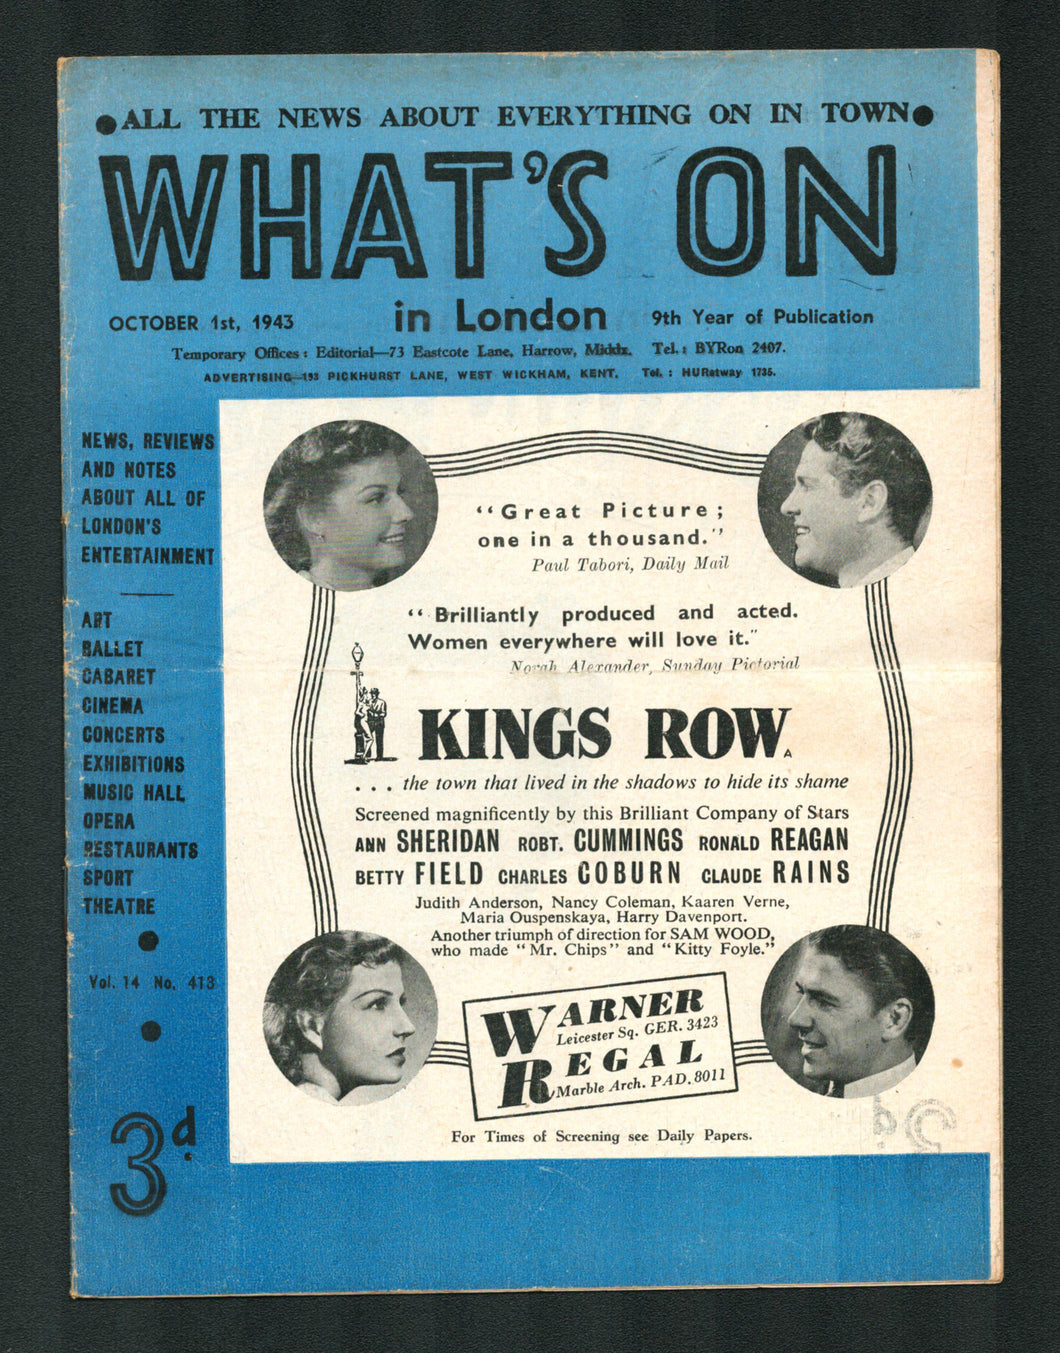 Whats on in London No 413 Oct 1 1943